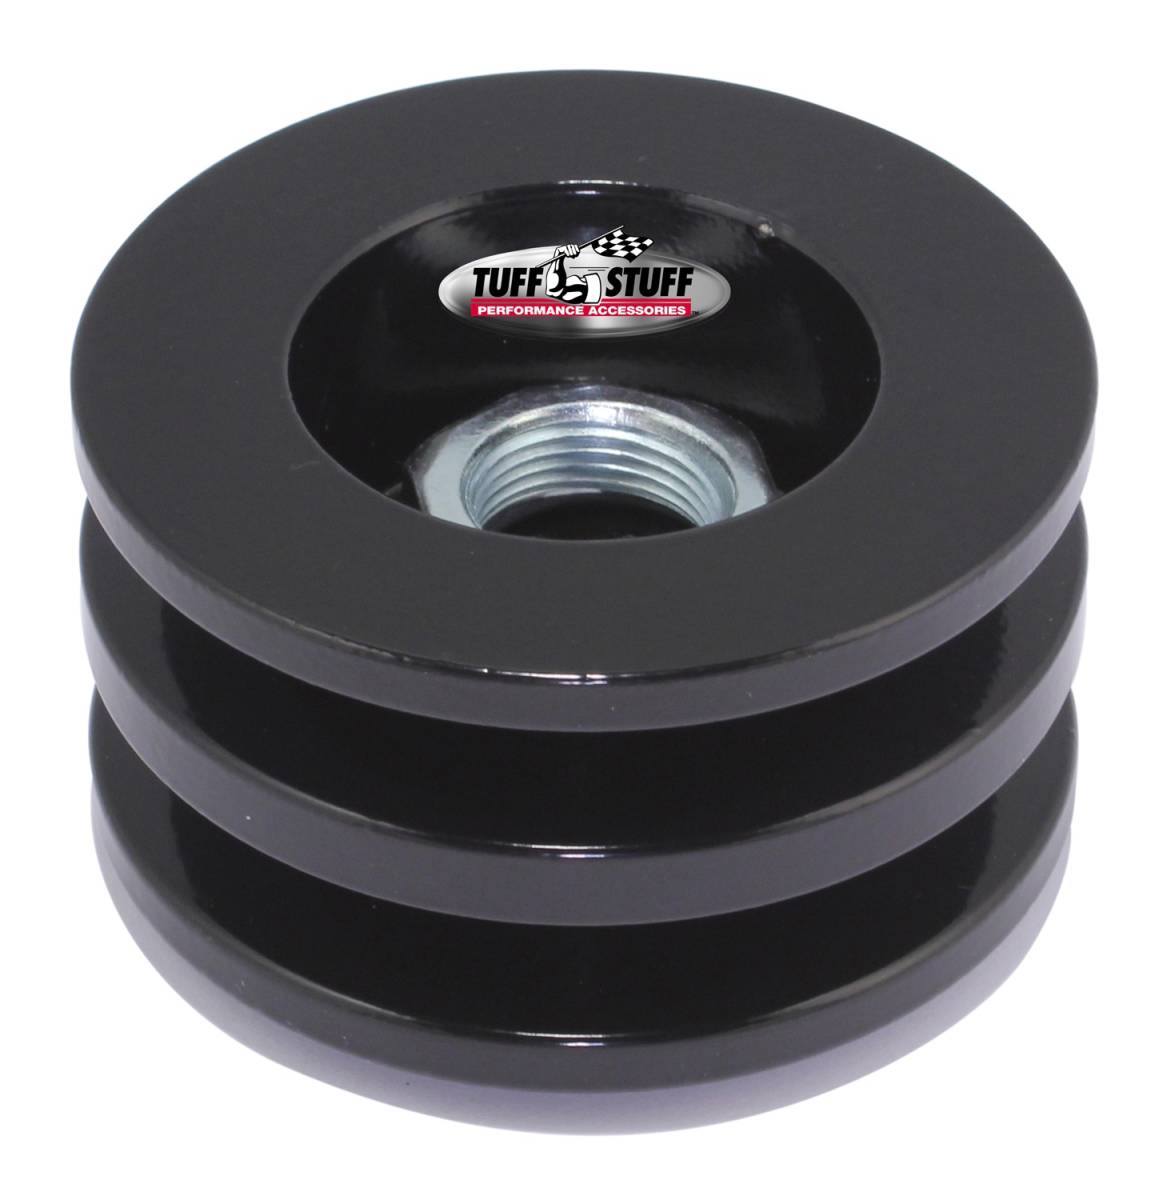 Tuff Stuff Performance - Alternator Pulley 2.628 in. Double V Groove Incl. Lock Washer/Nut Stealth Black 7610FB